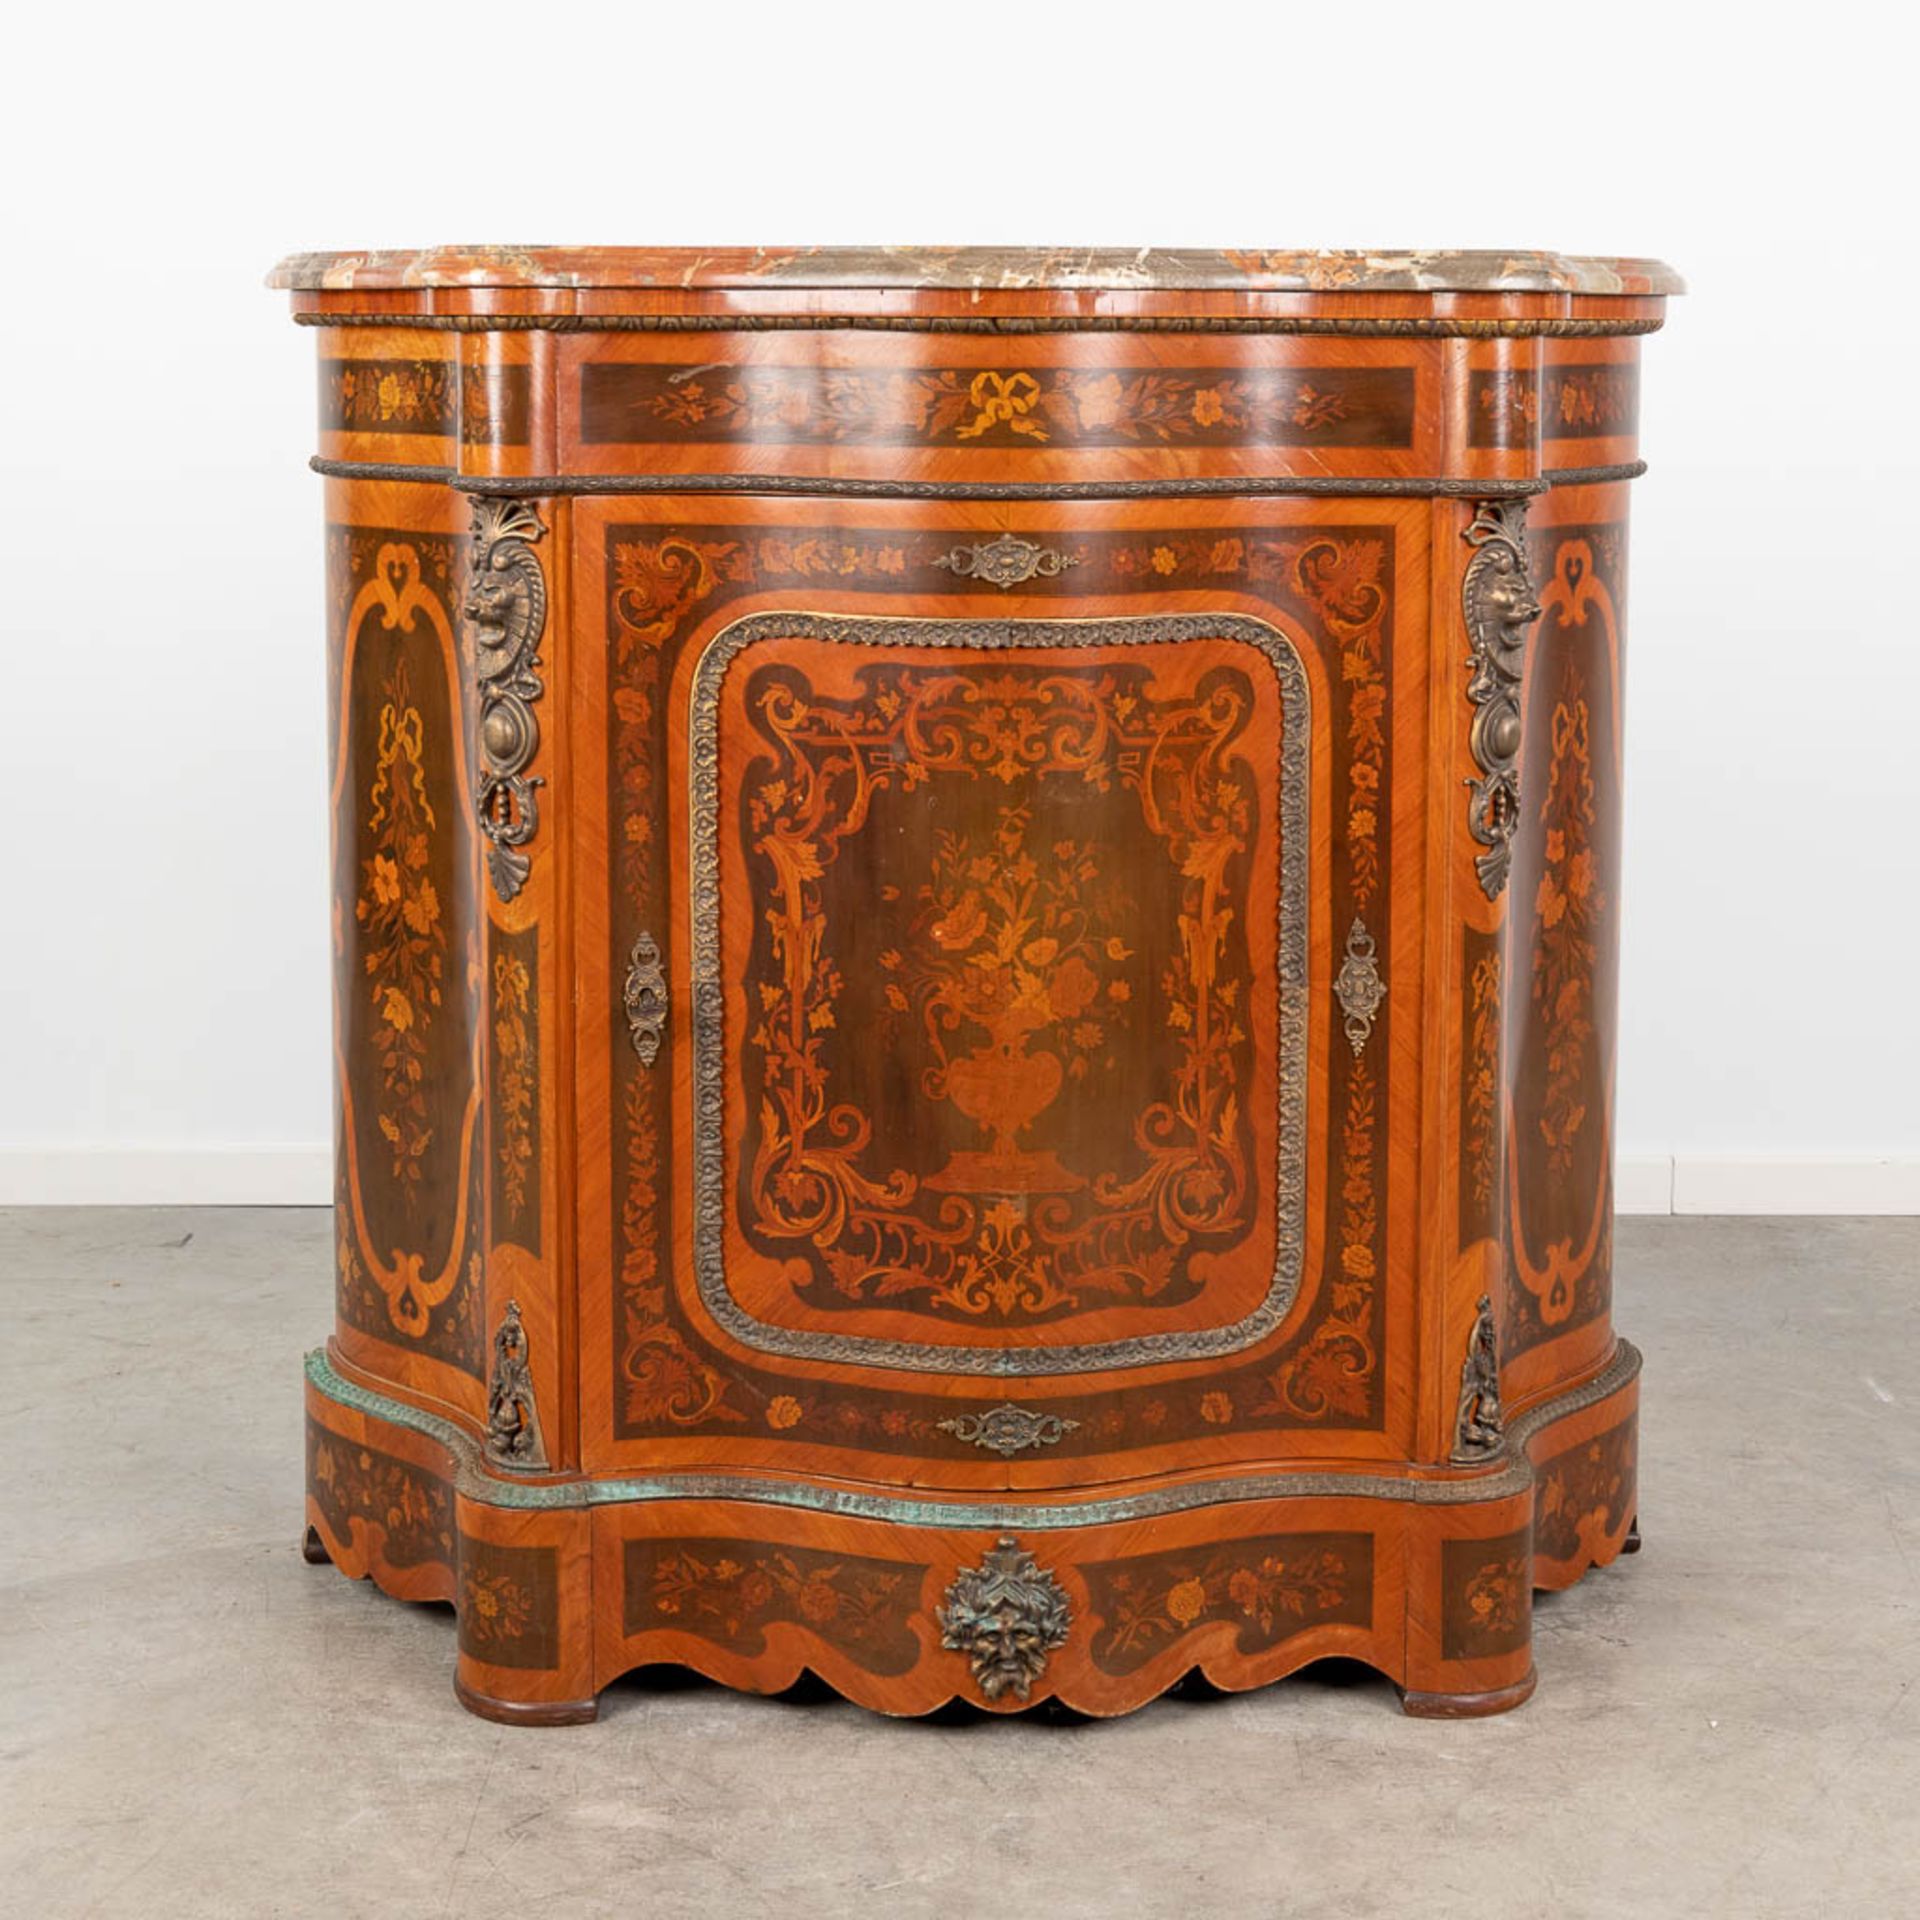 A one door commode, decorated with marquetry inlay and mounted with bronze. 20th century. (L:47 x W